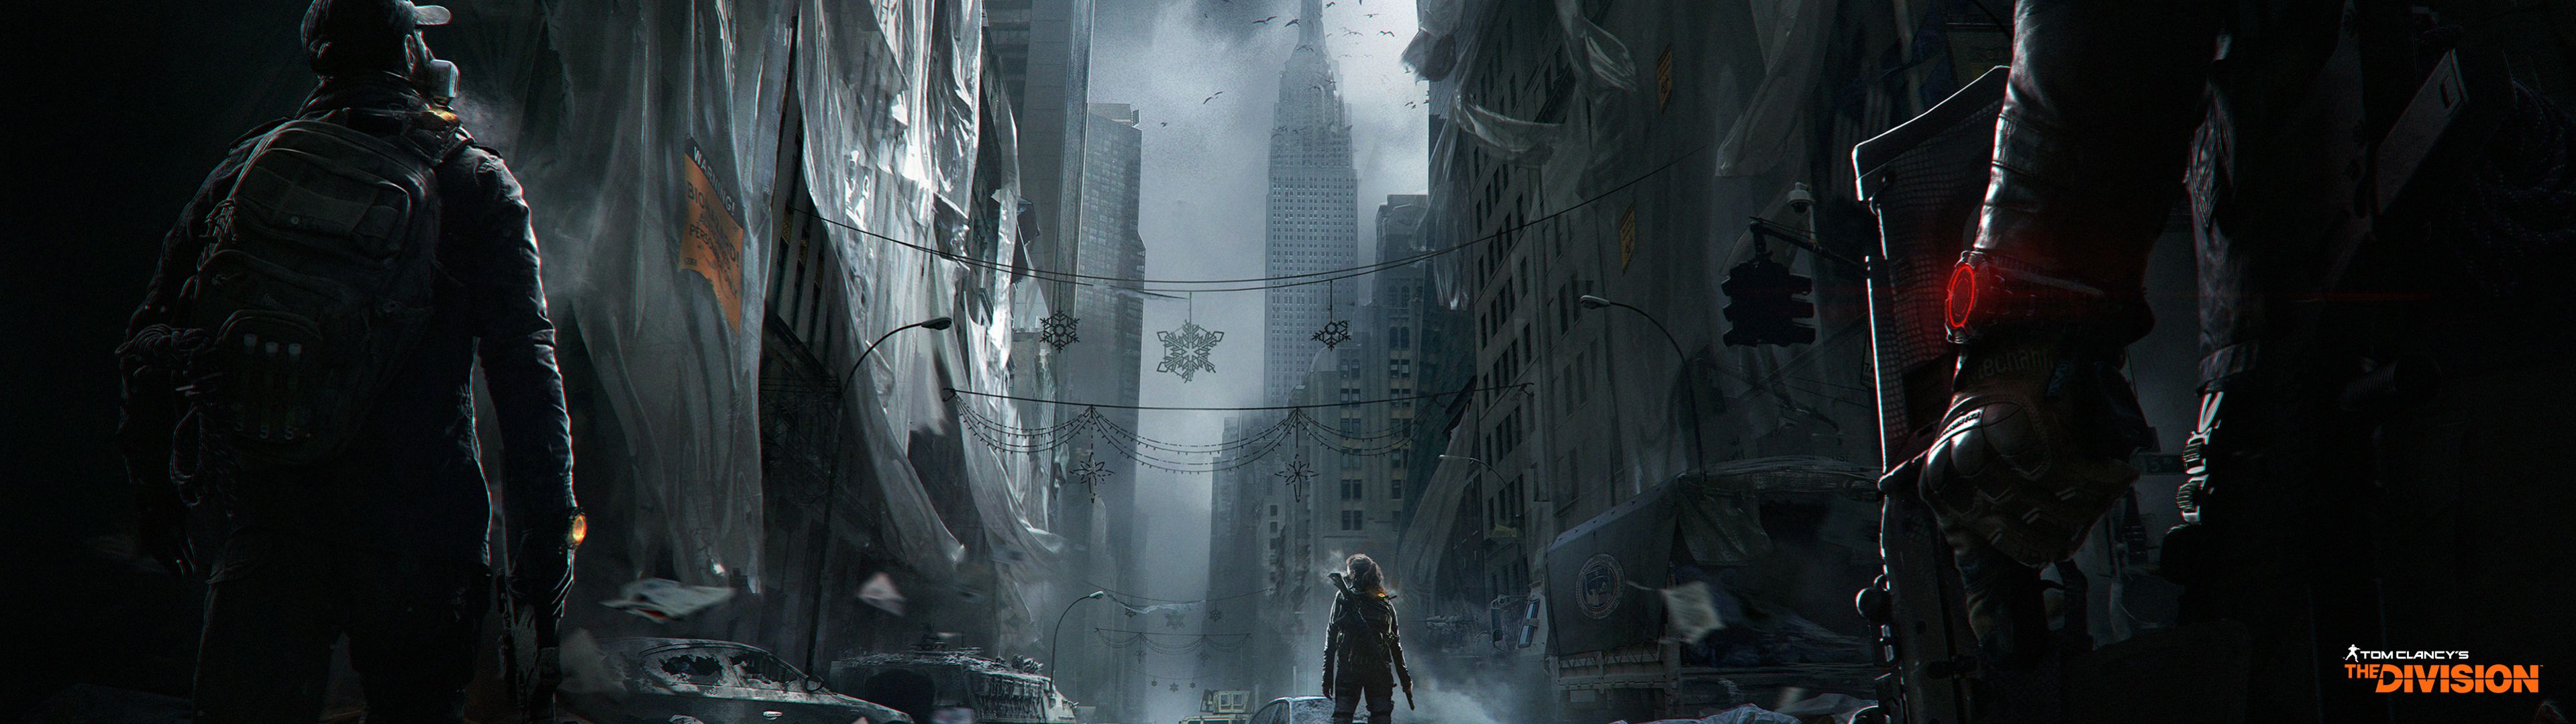 The Division Wallpaper